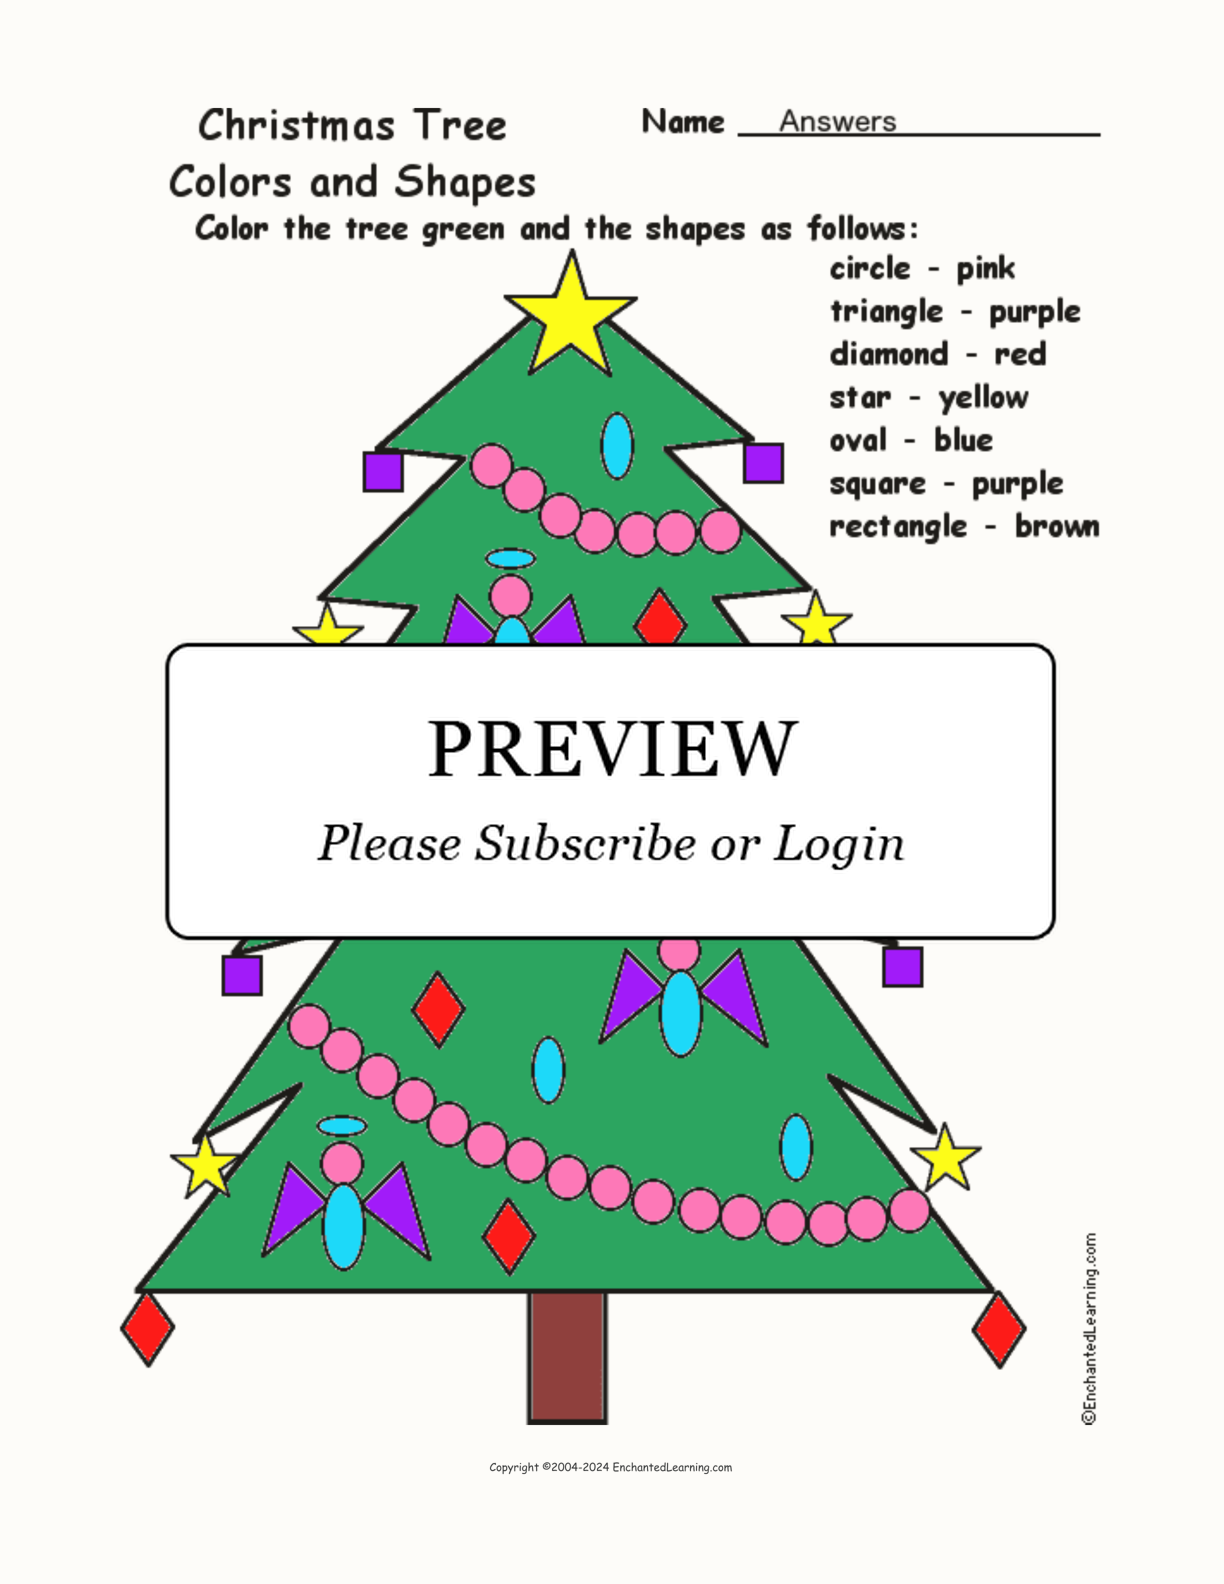 Christmas Tree: Colors and Shapes interactive worksheet page 2